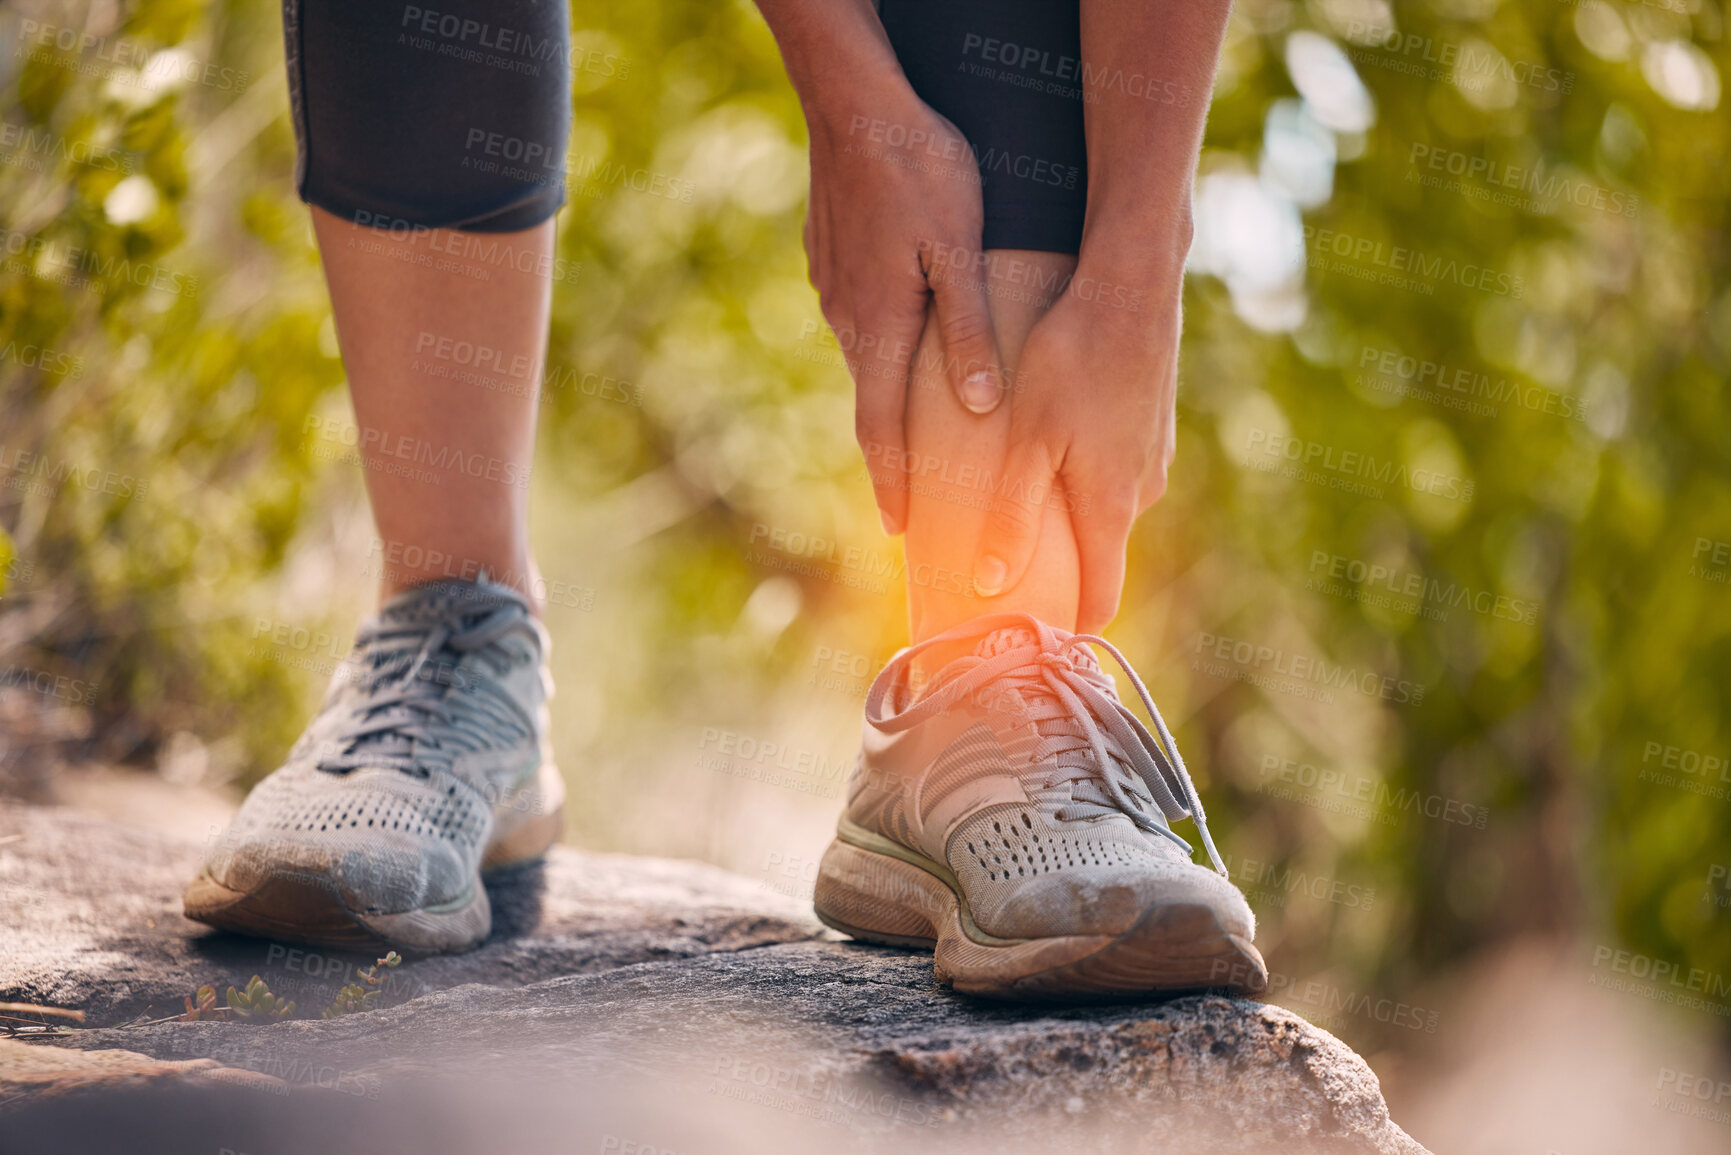 Buy stock photo Athlete, ankle and joint injury on nature walk workout with muscle cramps and strain close up. Inflammation, pain and physical trauma to body while trekking outdoors in park for fitness.